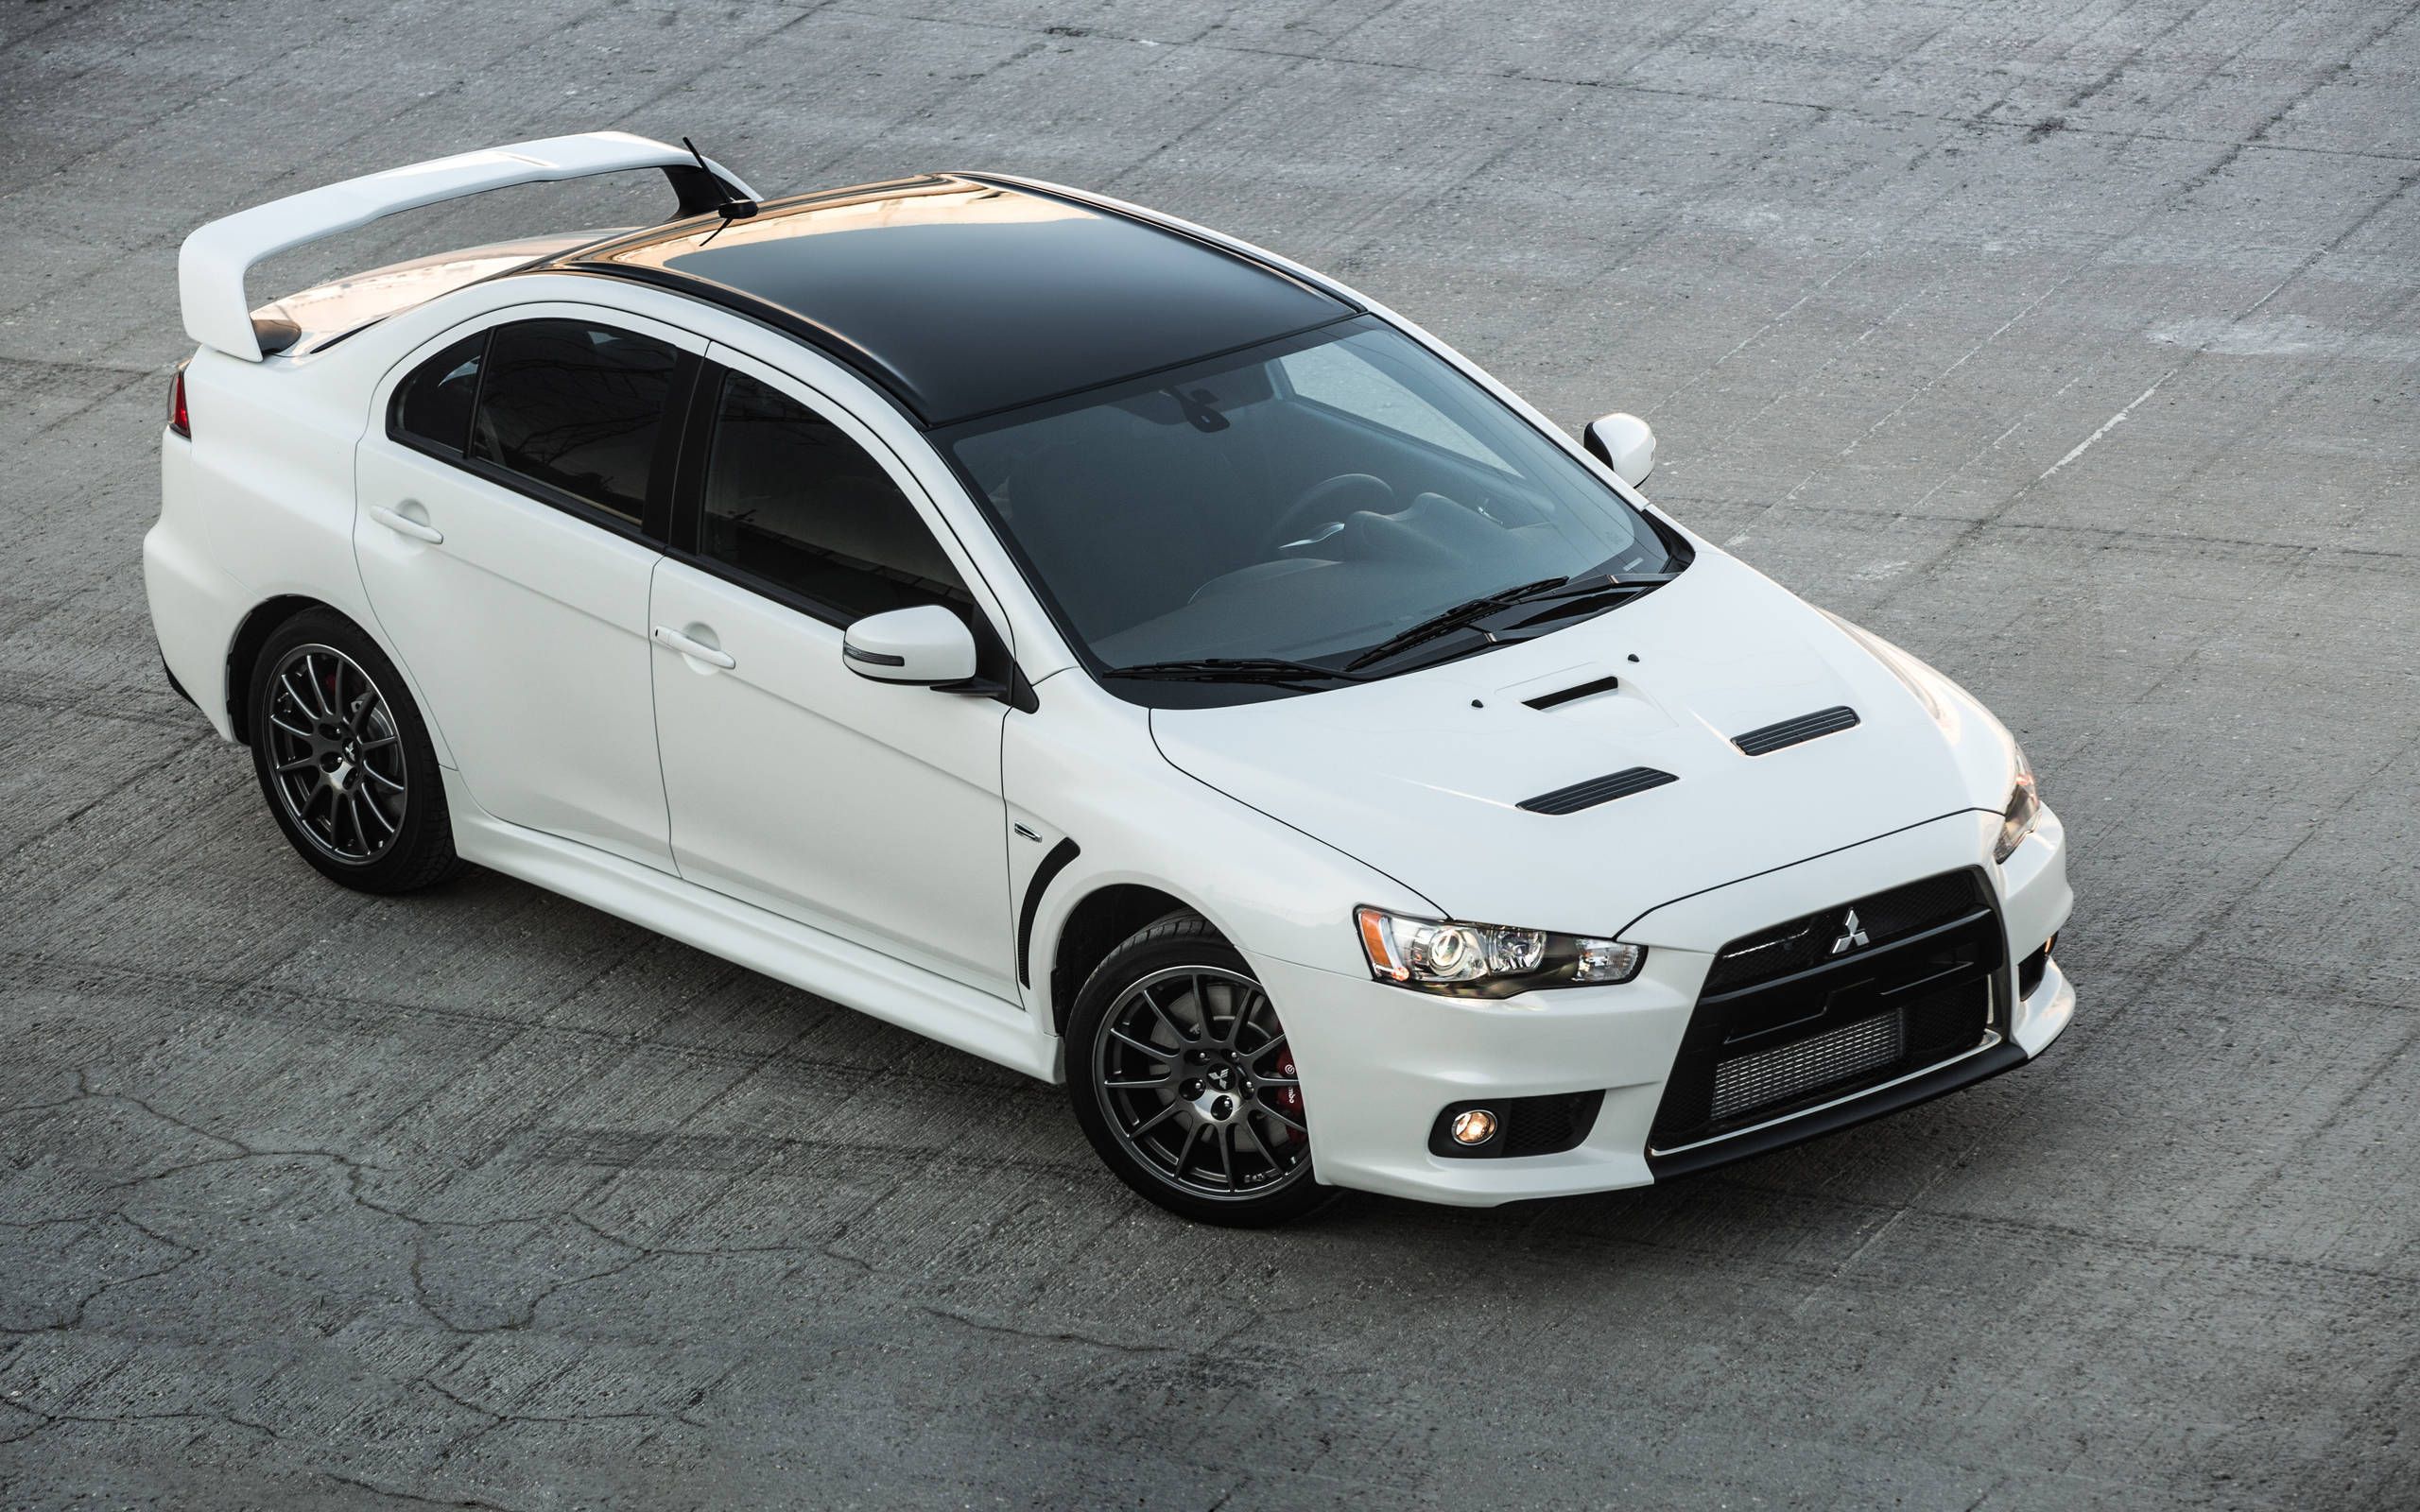 2015 Mitsubishi Lancer Evolution Final Edition review: A fitting ...